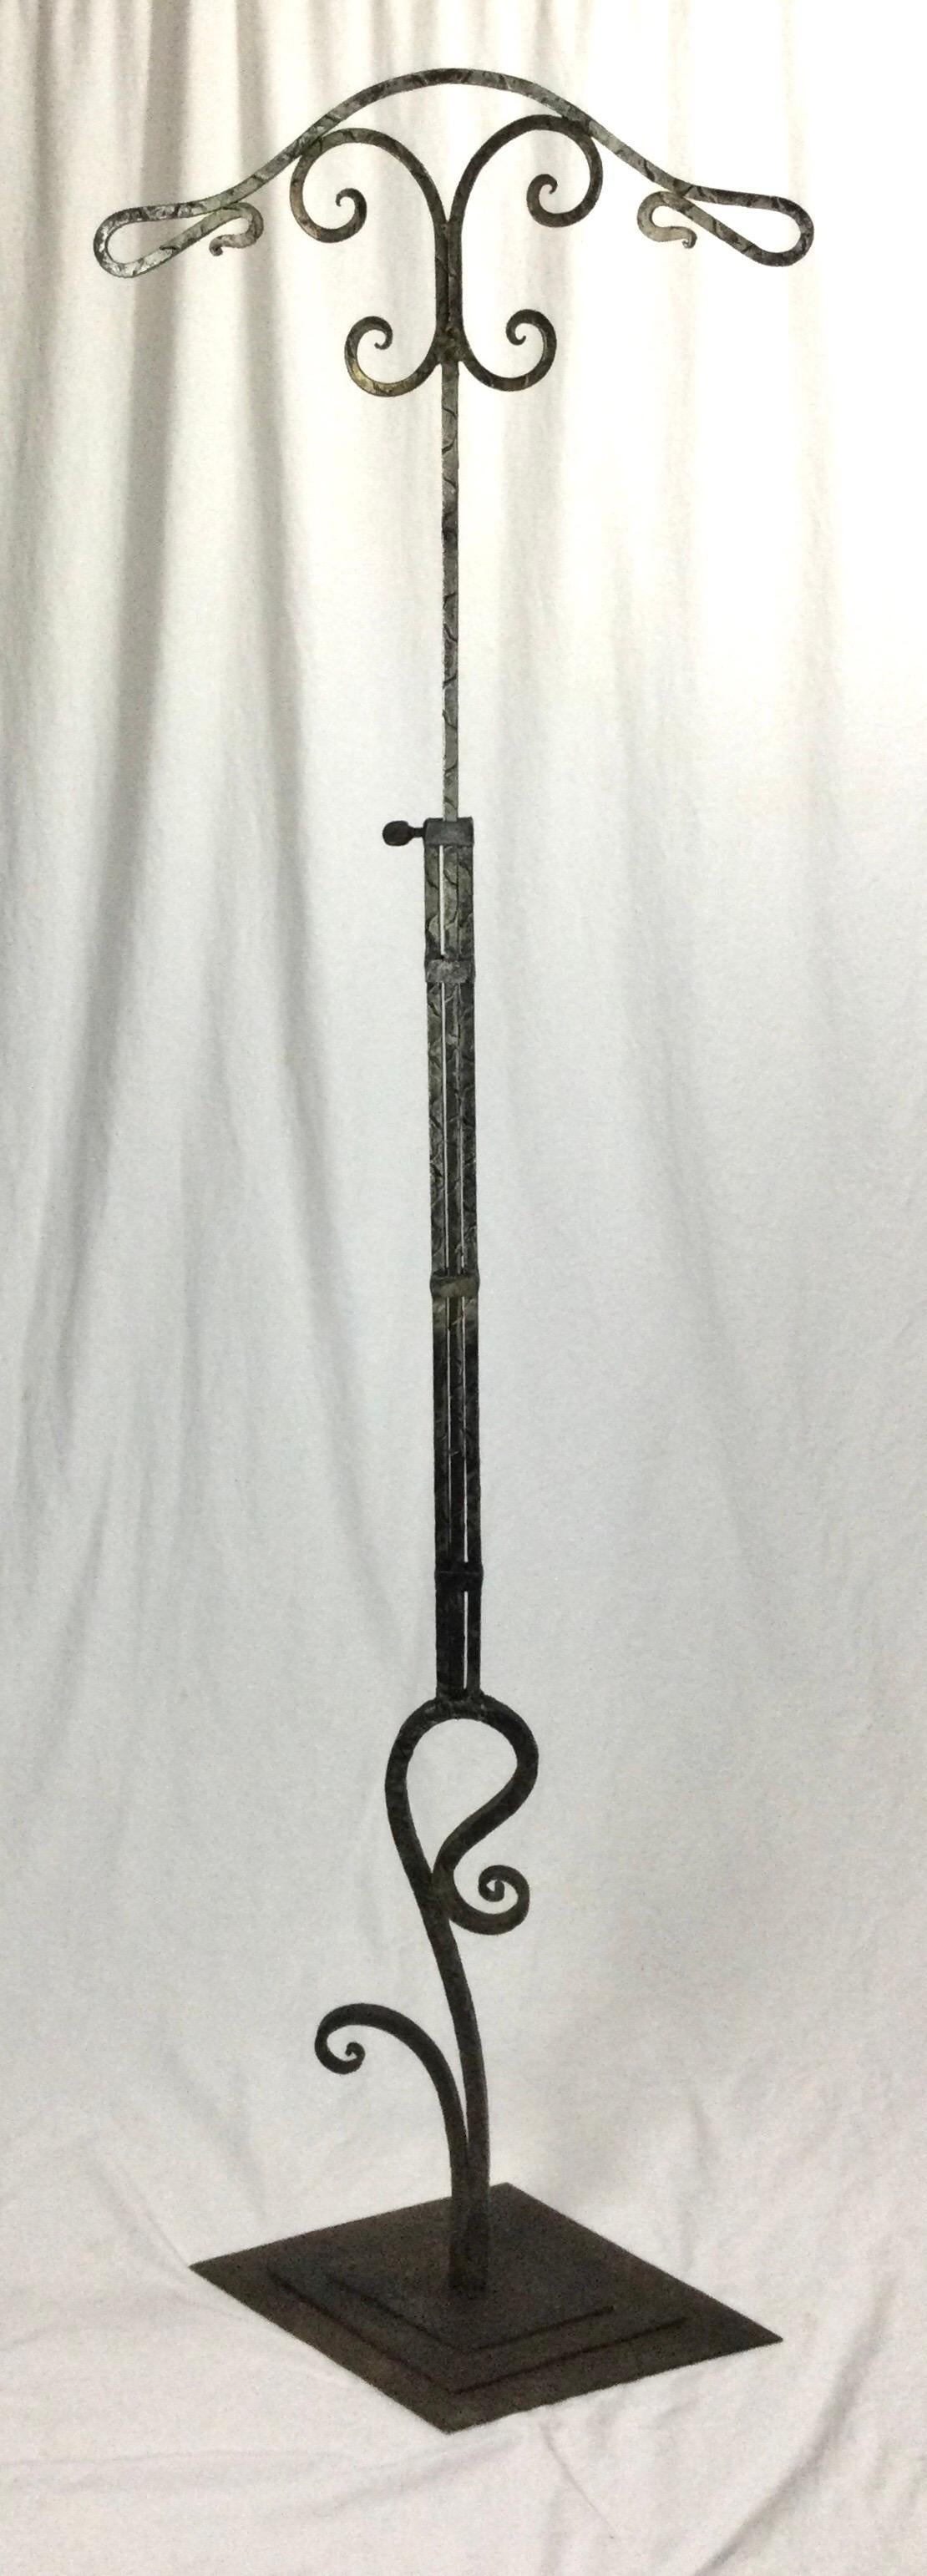 Early 20th century Art Deco iron adjustable clothing display valet stand. I was told that this stand came from a NYC Mens Clothing store. It is photographed at its lowest position of 34 1/2